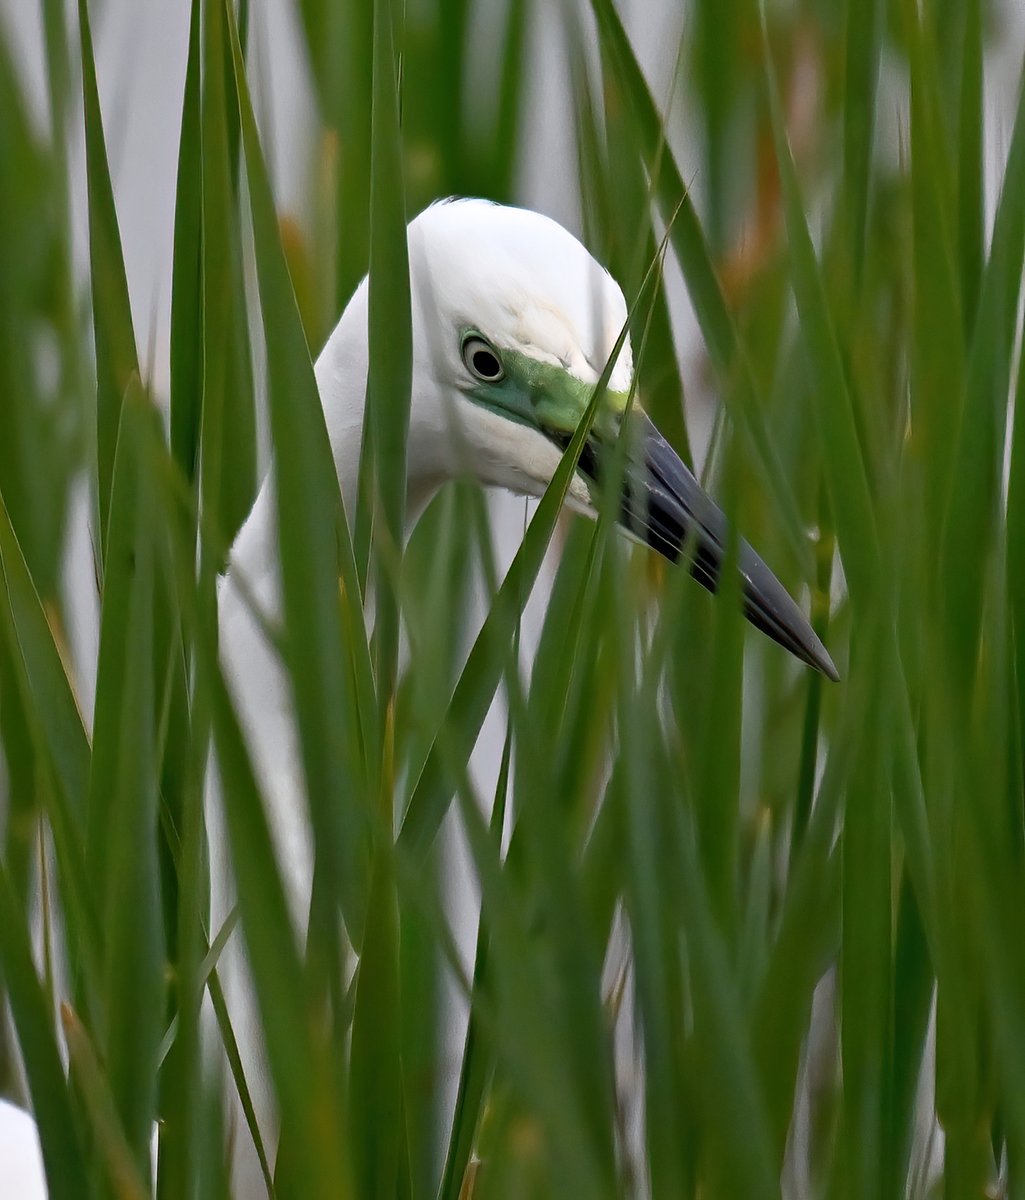 Creeping through the reeds, looking for an unsuspecting meal.... a Great White Egret at RSPB Ham Wall recently. 😁🐦